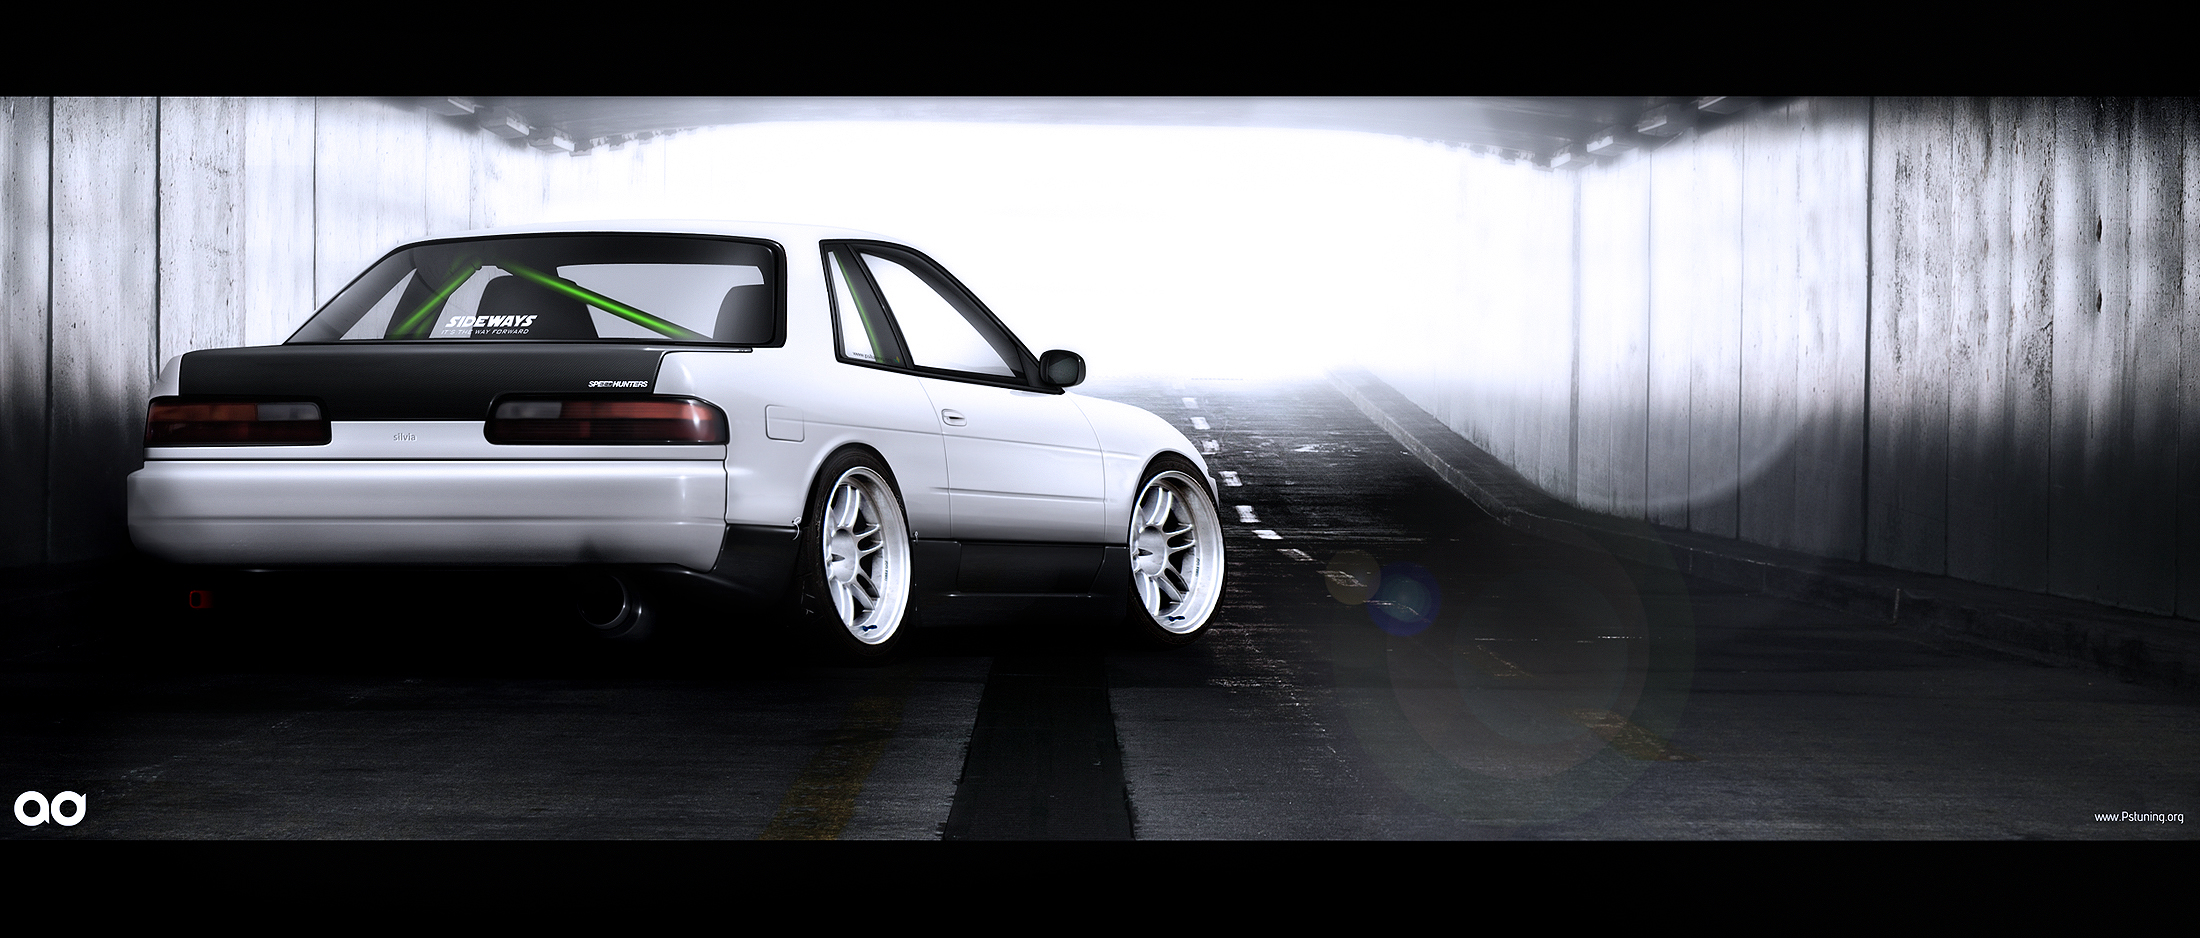 Silvia S13 Stance Nissan By Aerodesign94